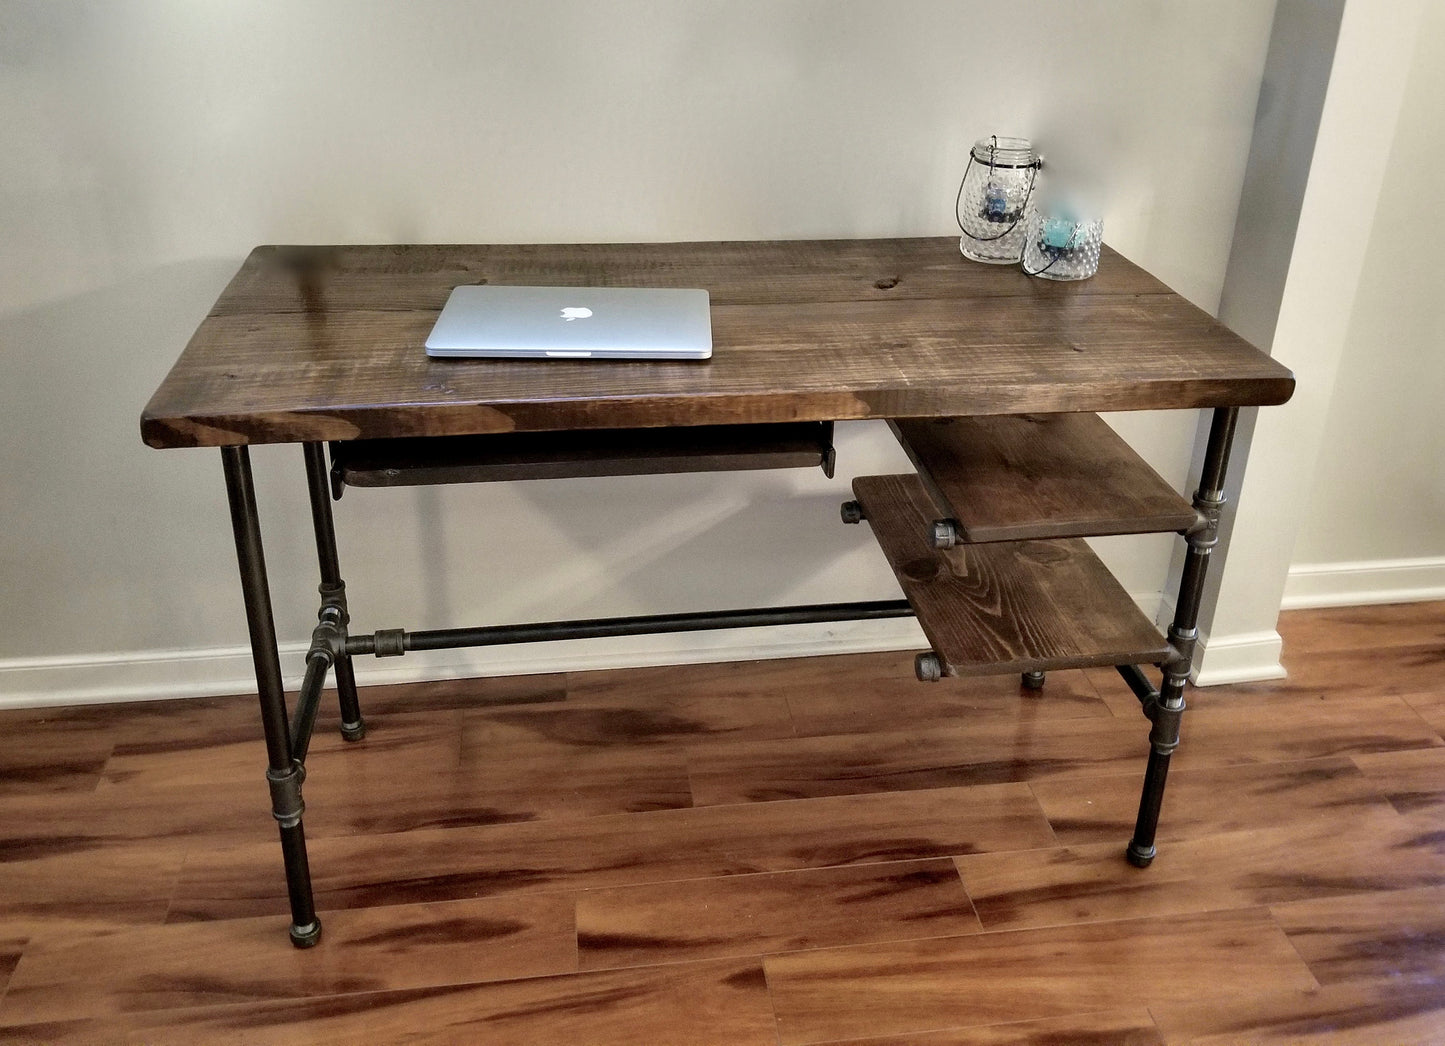 Steel and Wood Desk - Office Iron Pipe Desk with 2 Shelves and Keyboard Tray